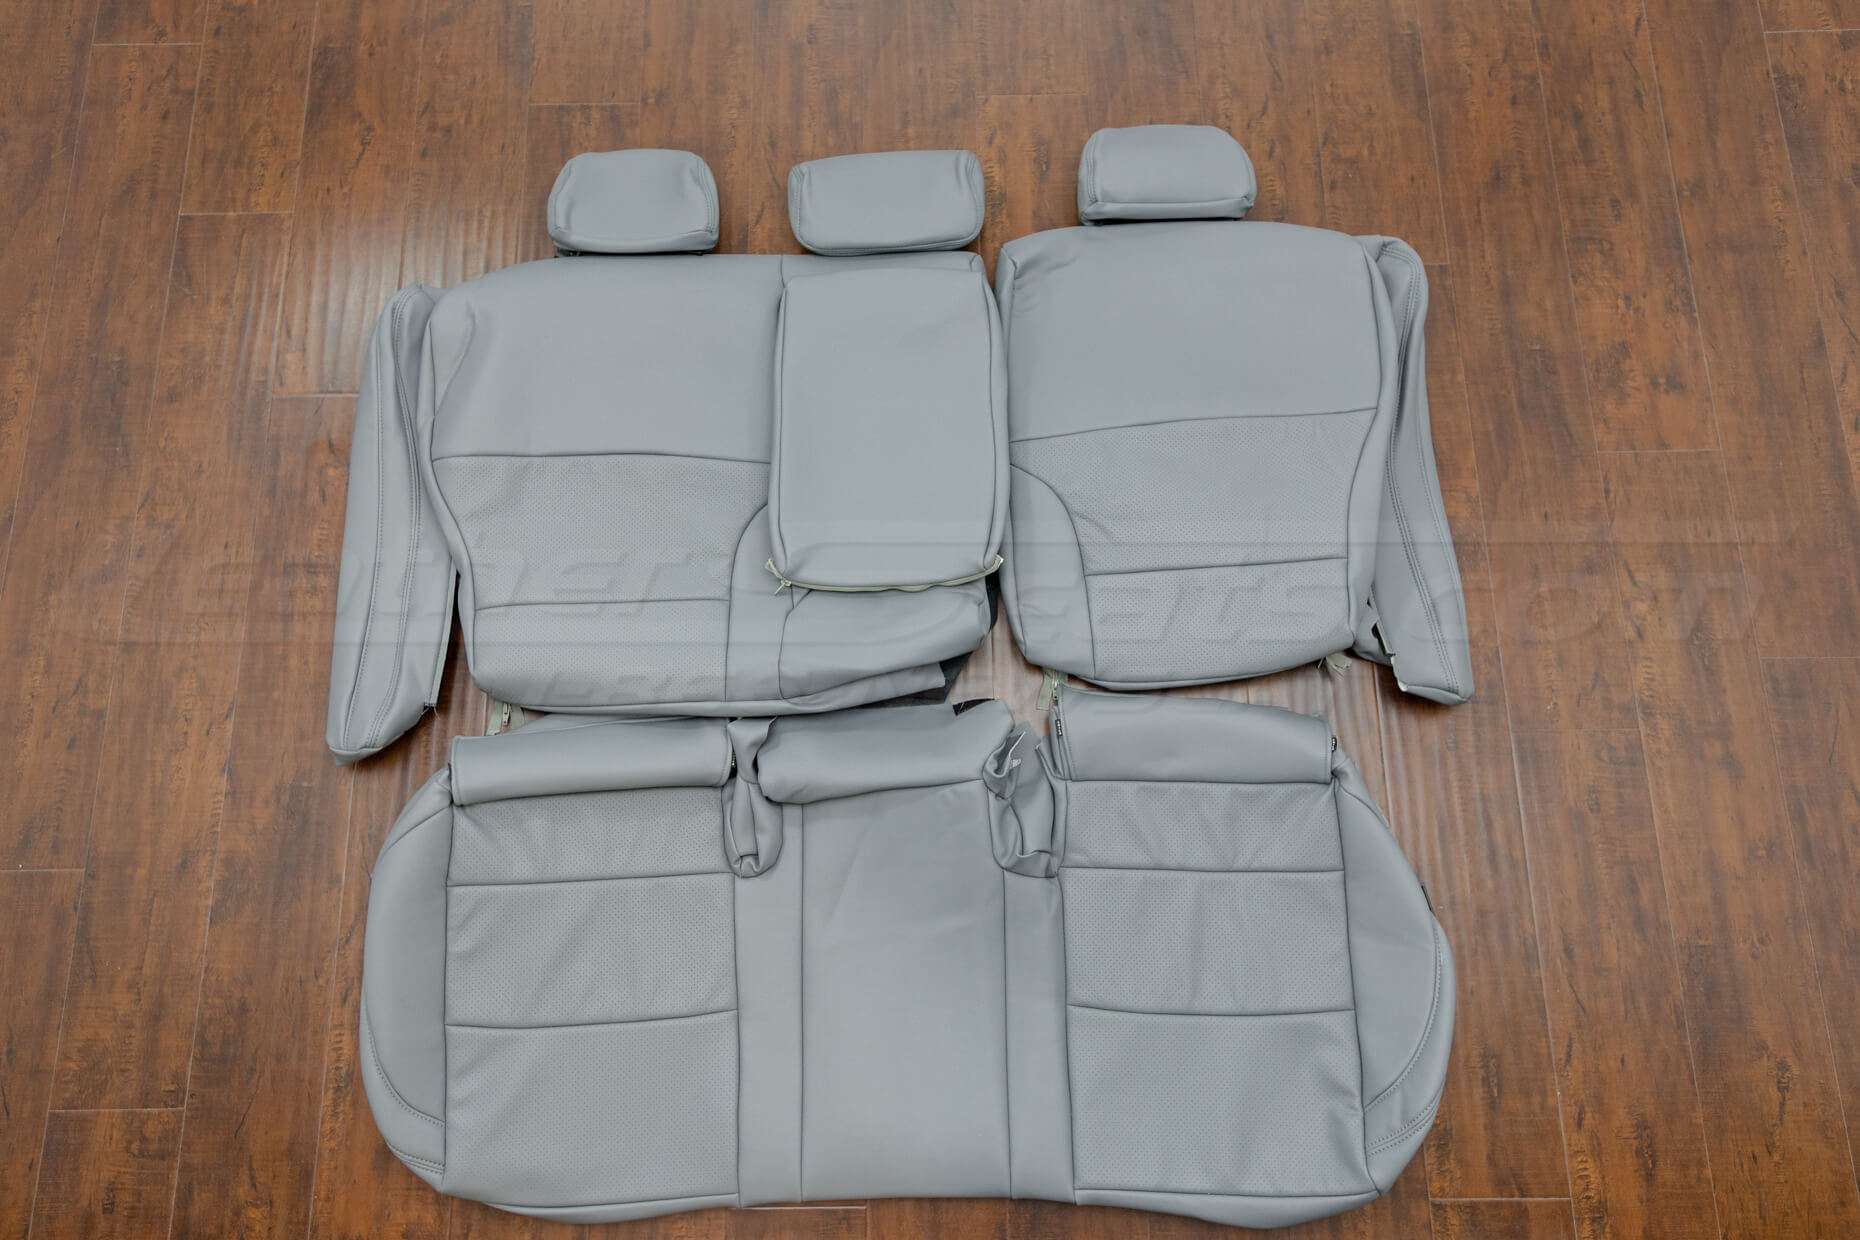 Subaru Legacy rear seat upholstery with armrest in bolsters in crater grey